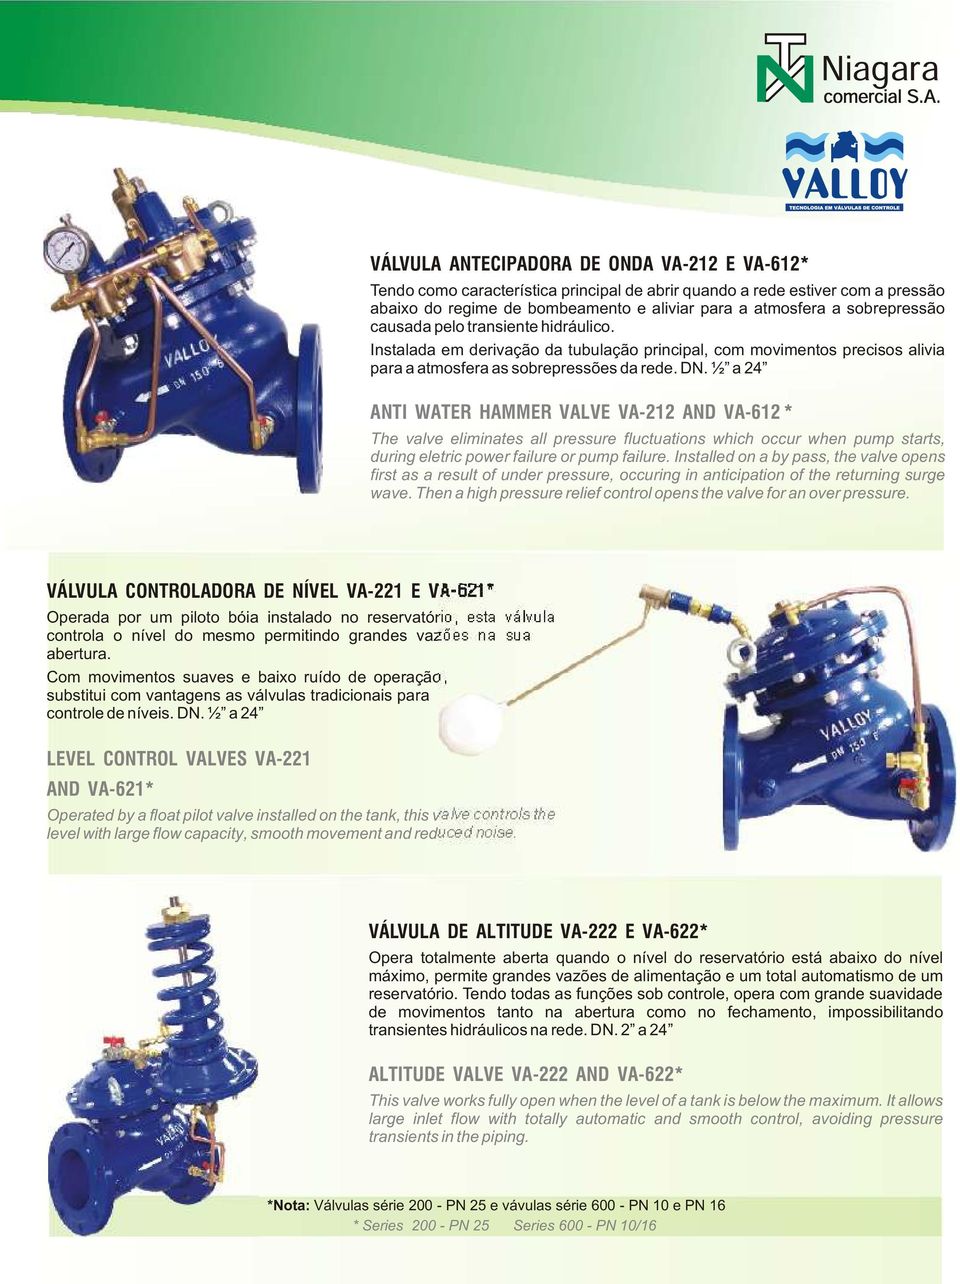 ½ a 24 ANTI WATER HAMMER VALVE VA-212 AND VA-612 * The valve eliminates all pressure fluctuations which occur when pump starts, during eletric power failure or pump failure.